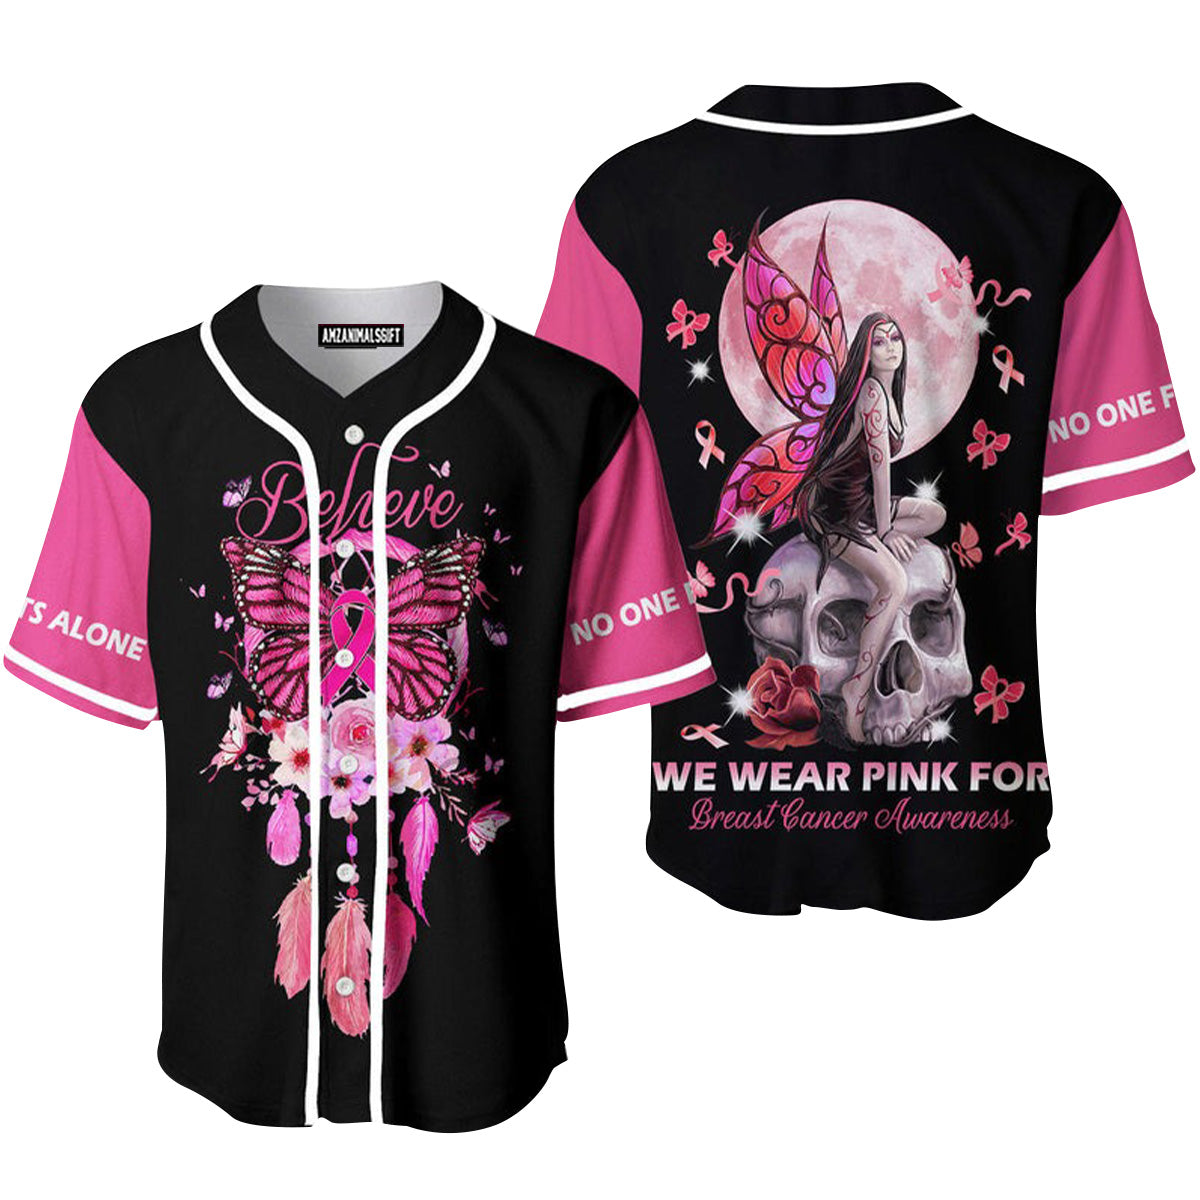 Breast Cancer Awareness Skull Angel Girl Baseball Jersey, Perfect Outfit For Men And Women On Breast Cancer Survivors Baseball Team Baseball Fans